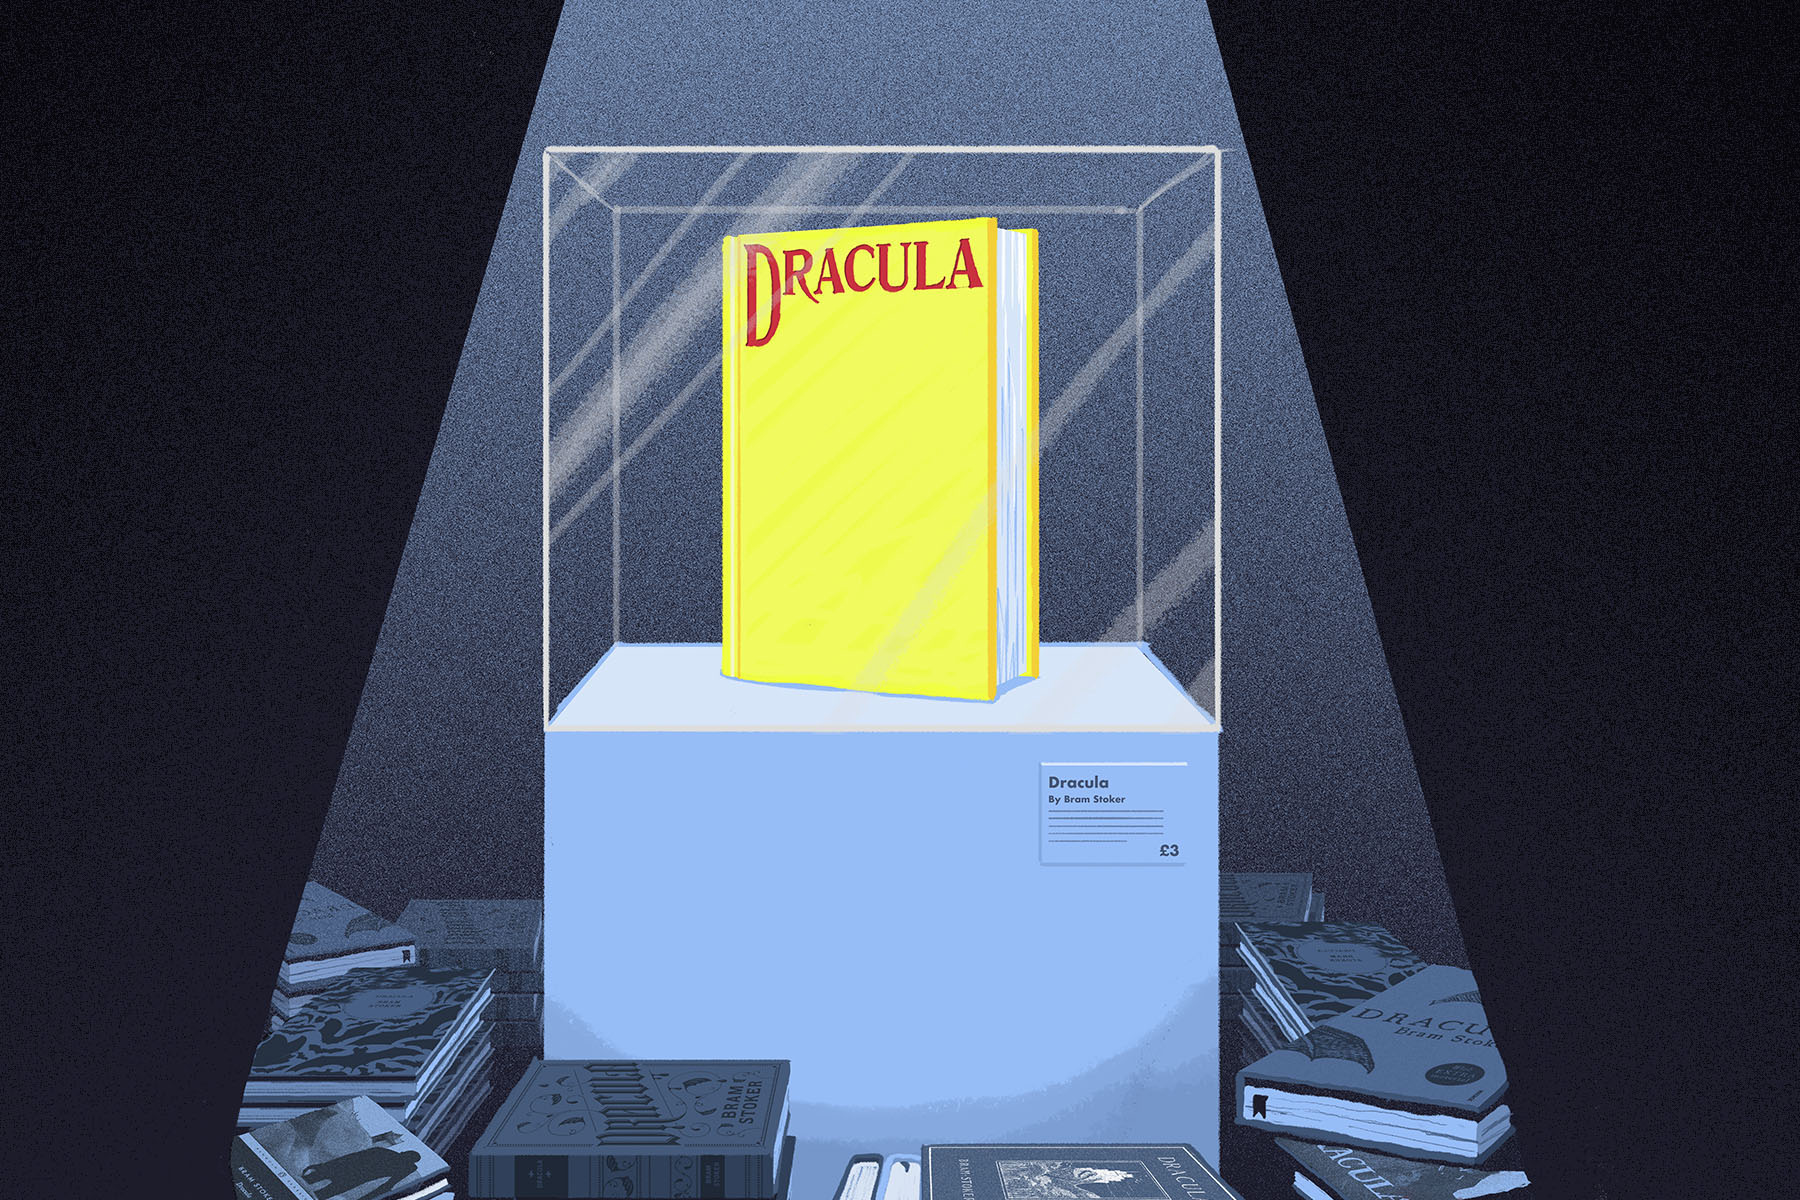 An illustration of a yellow book, with the title Dracula in red, on a white podium in blue light